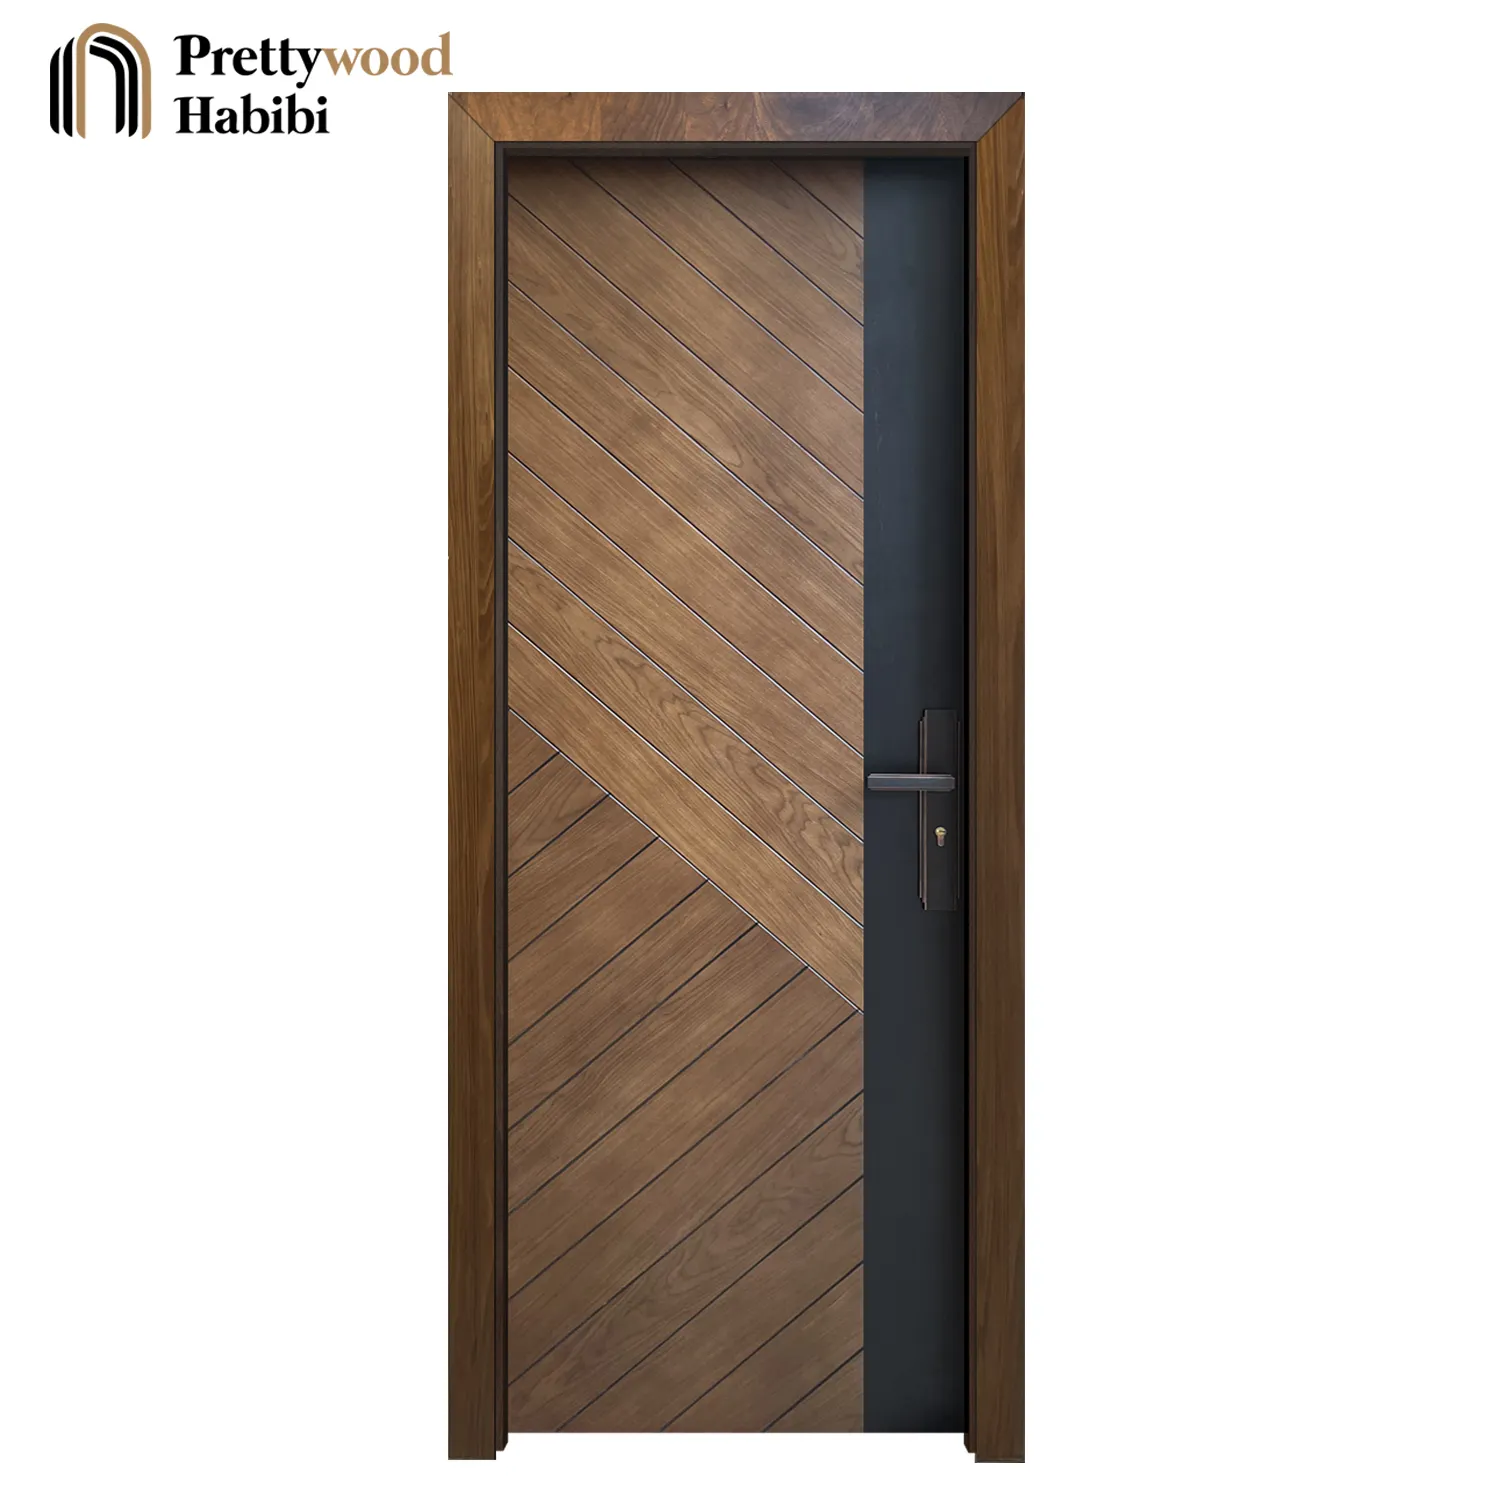 Prettywood Modern American Style Residential Interior Door Prehung Solid Wooden Walnut Double Color Room Door For Houses